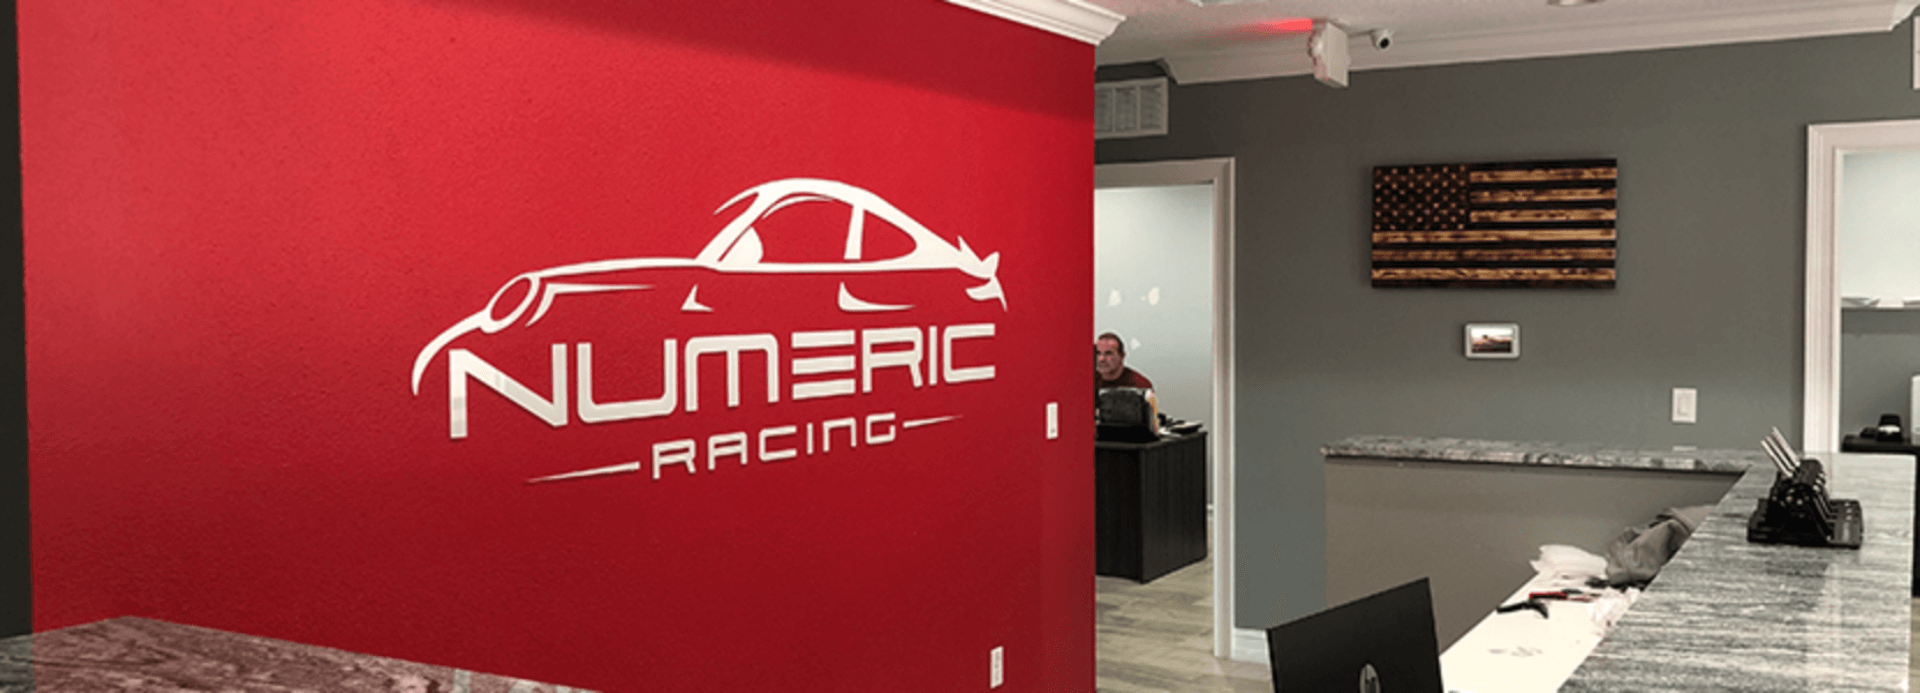 The front office wall of Numeric Racing HQ.